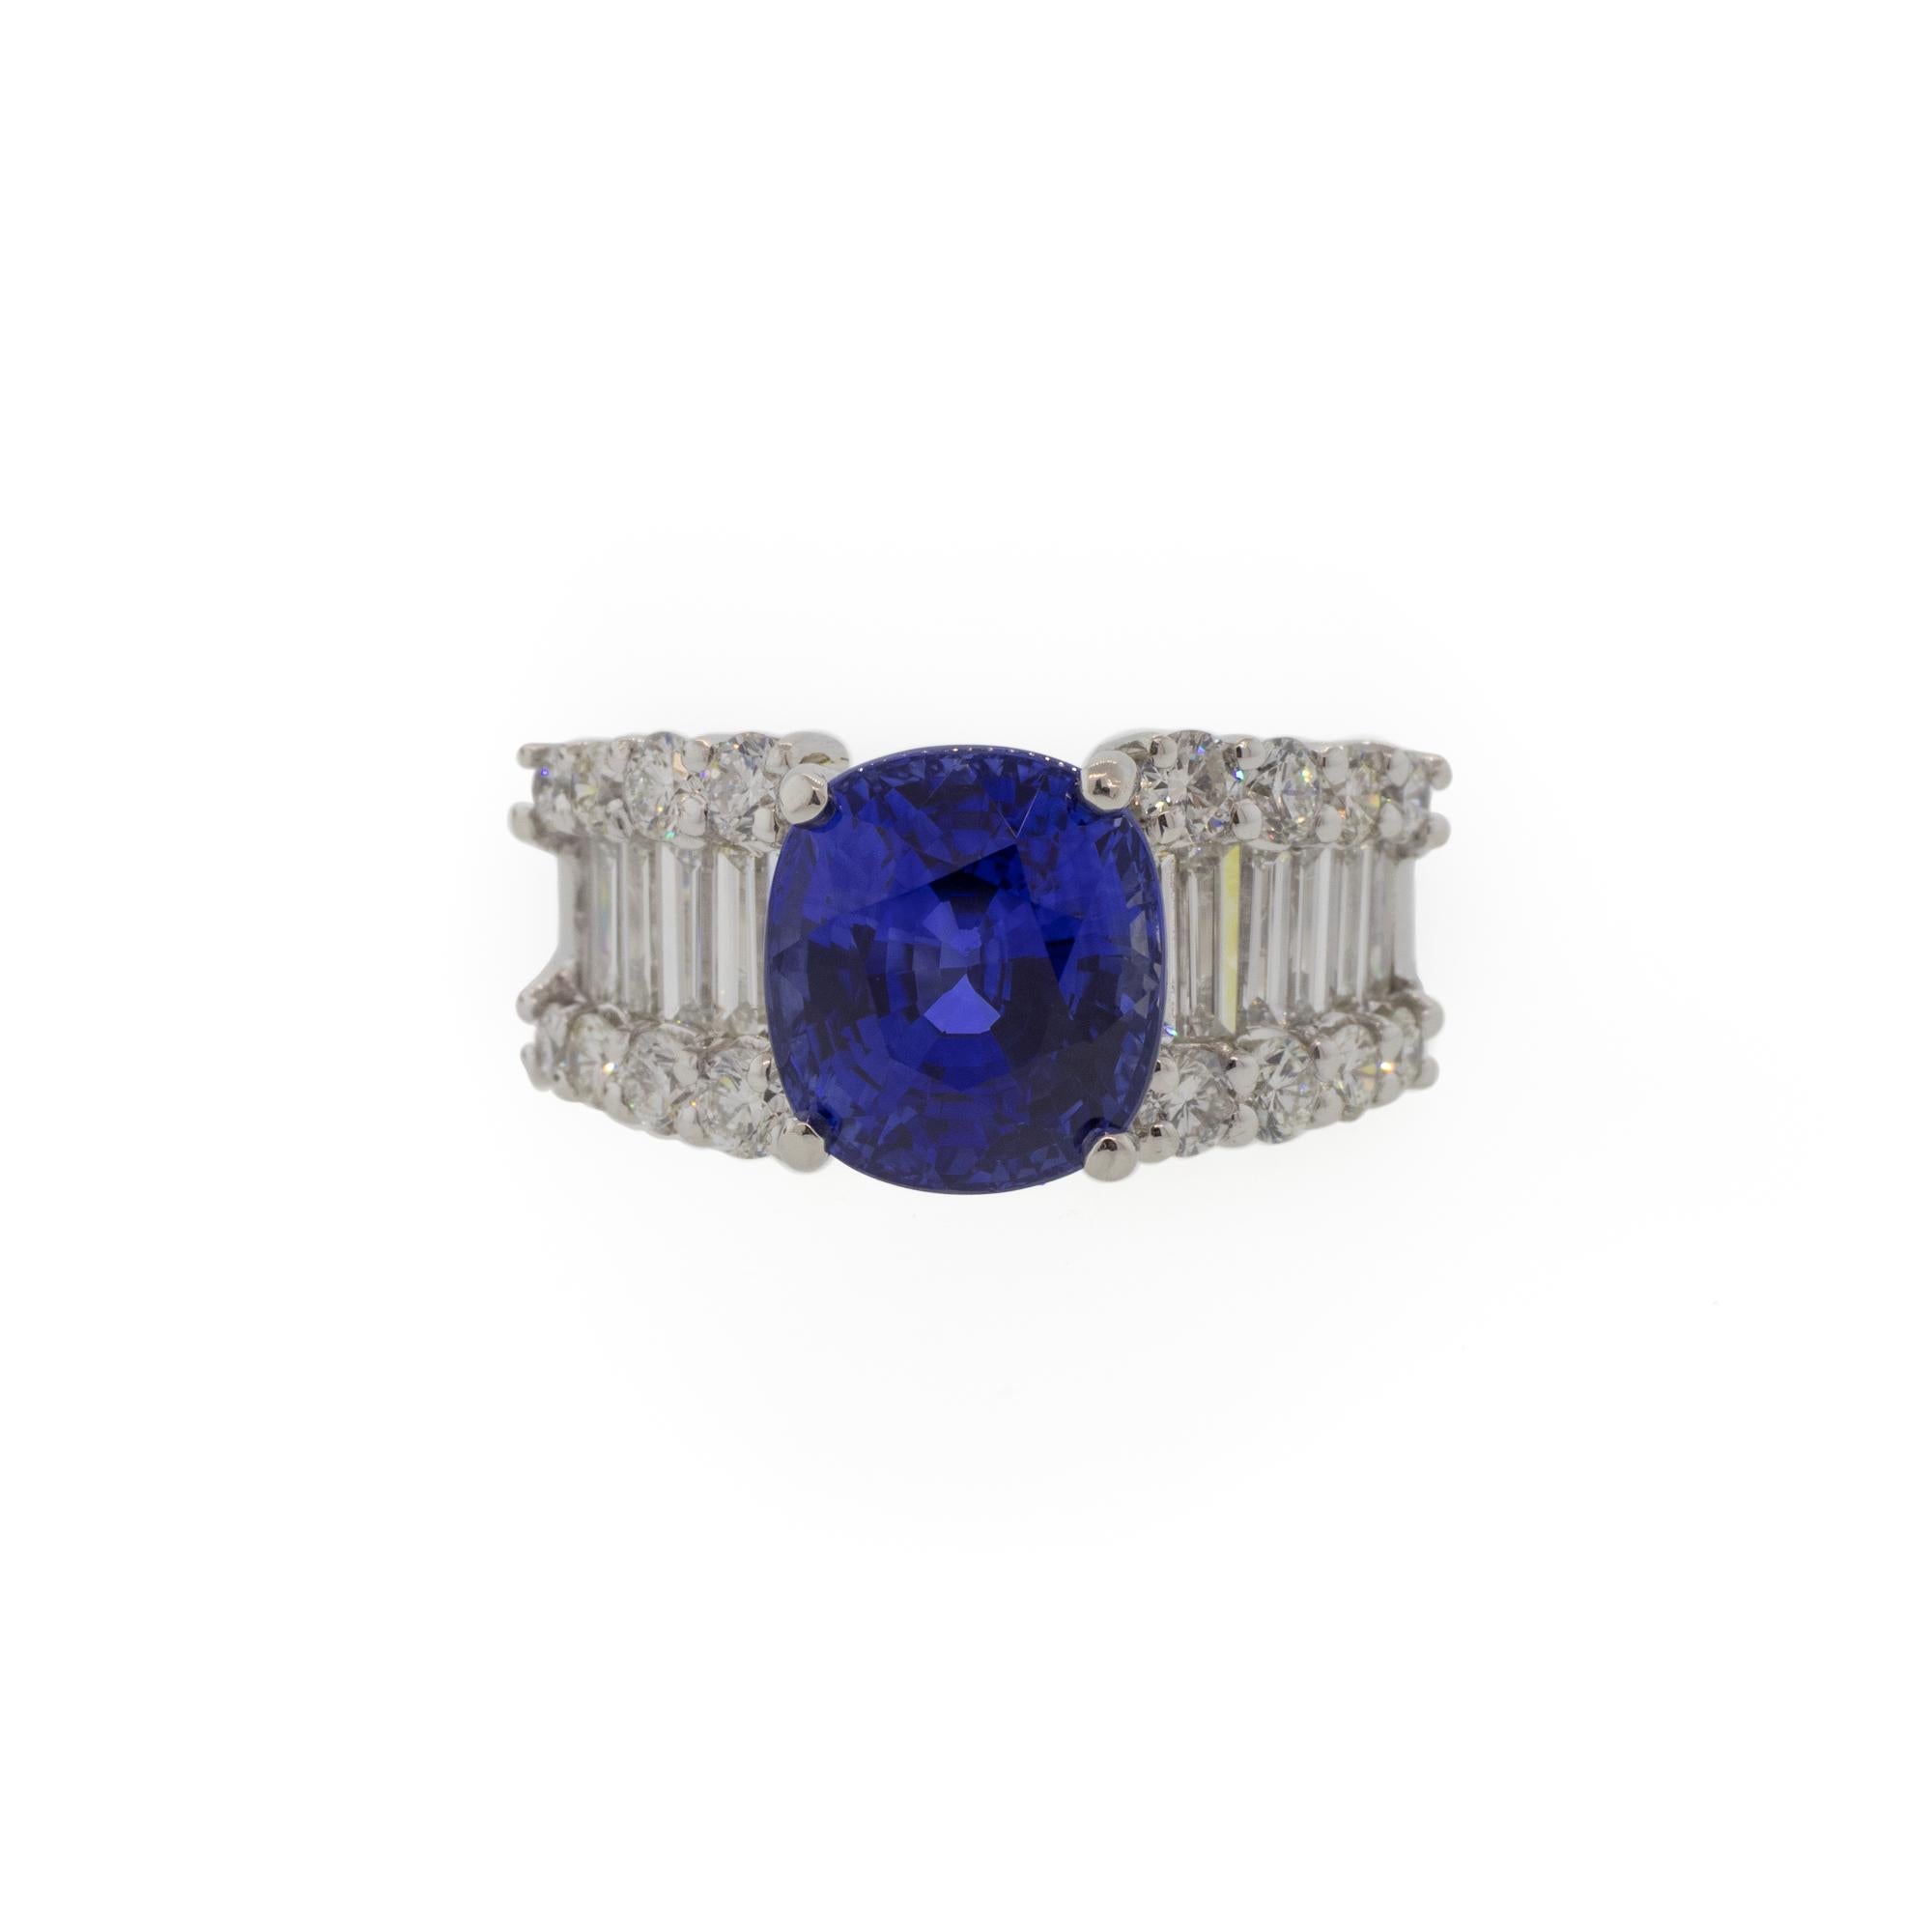 A glamorous vintage cocktail ring combining only the most beautiful components. The 5.85 carat cushion cut sapphire center gemstone originates from Sri Lanka and has undergone a standard heat treatment to bring out an intense true blue color. The